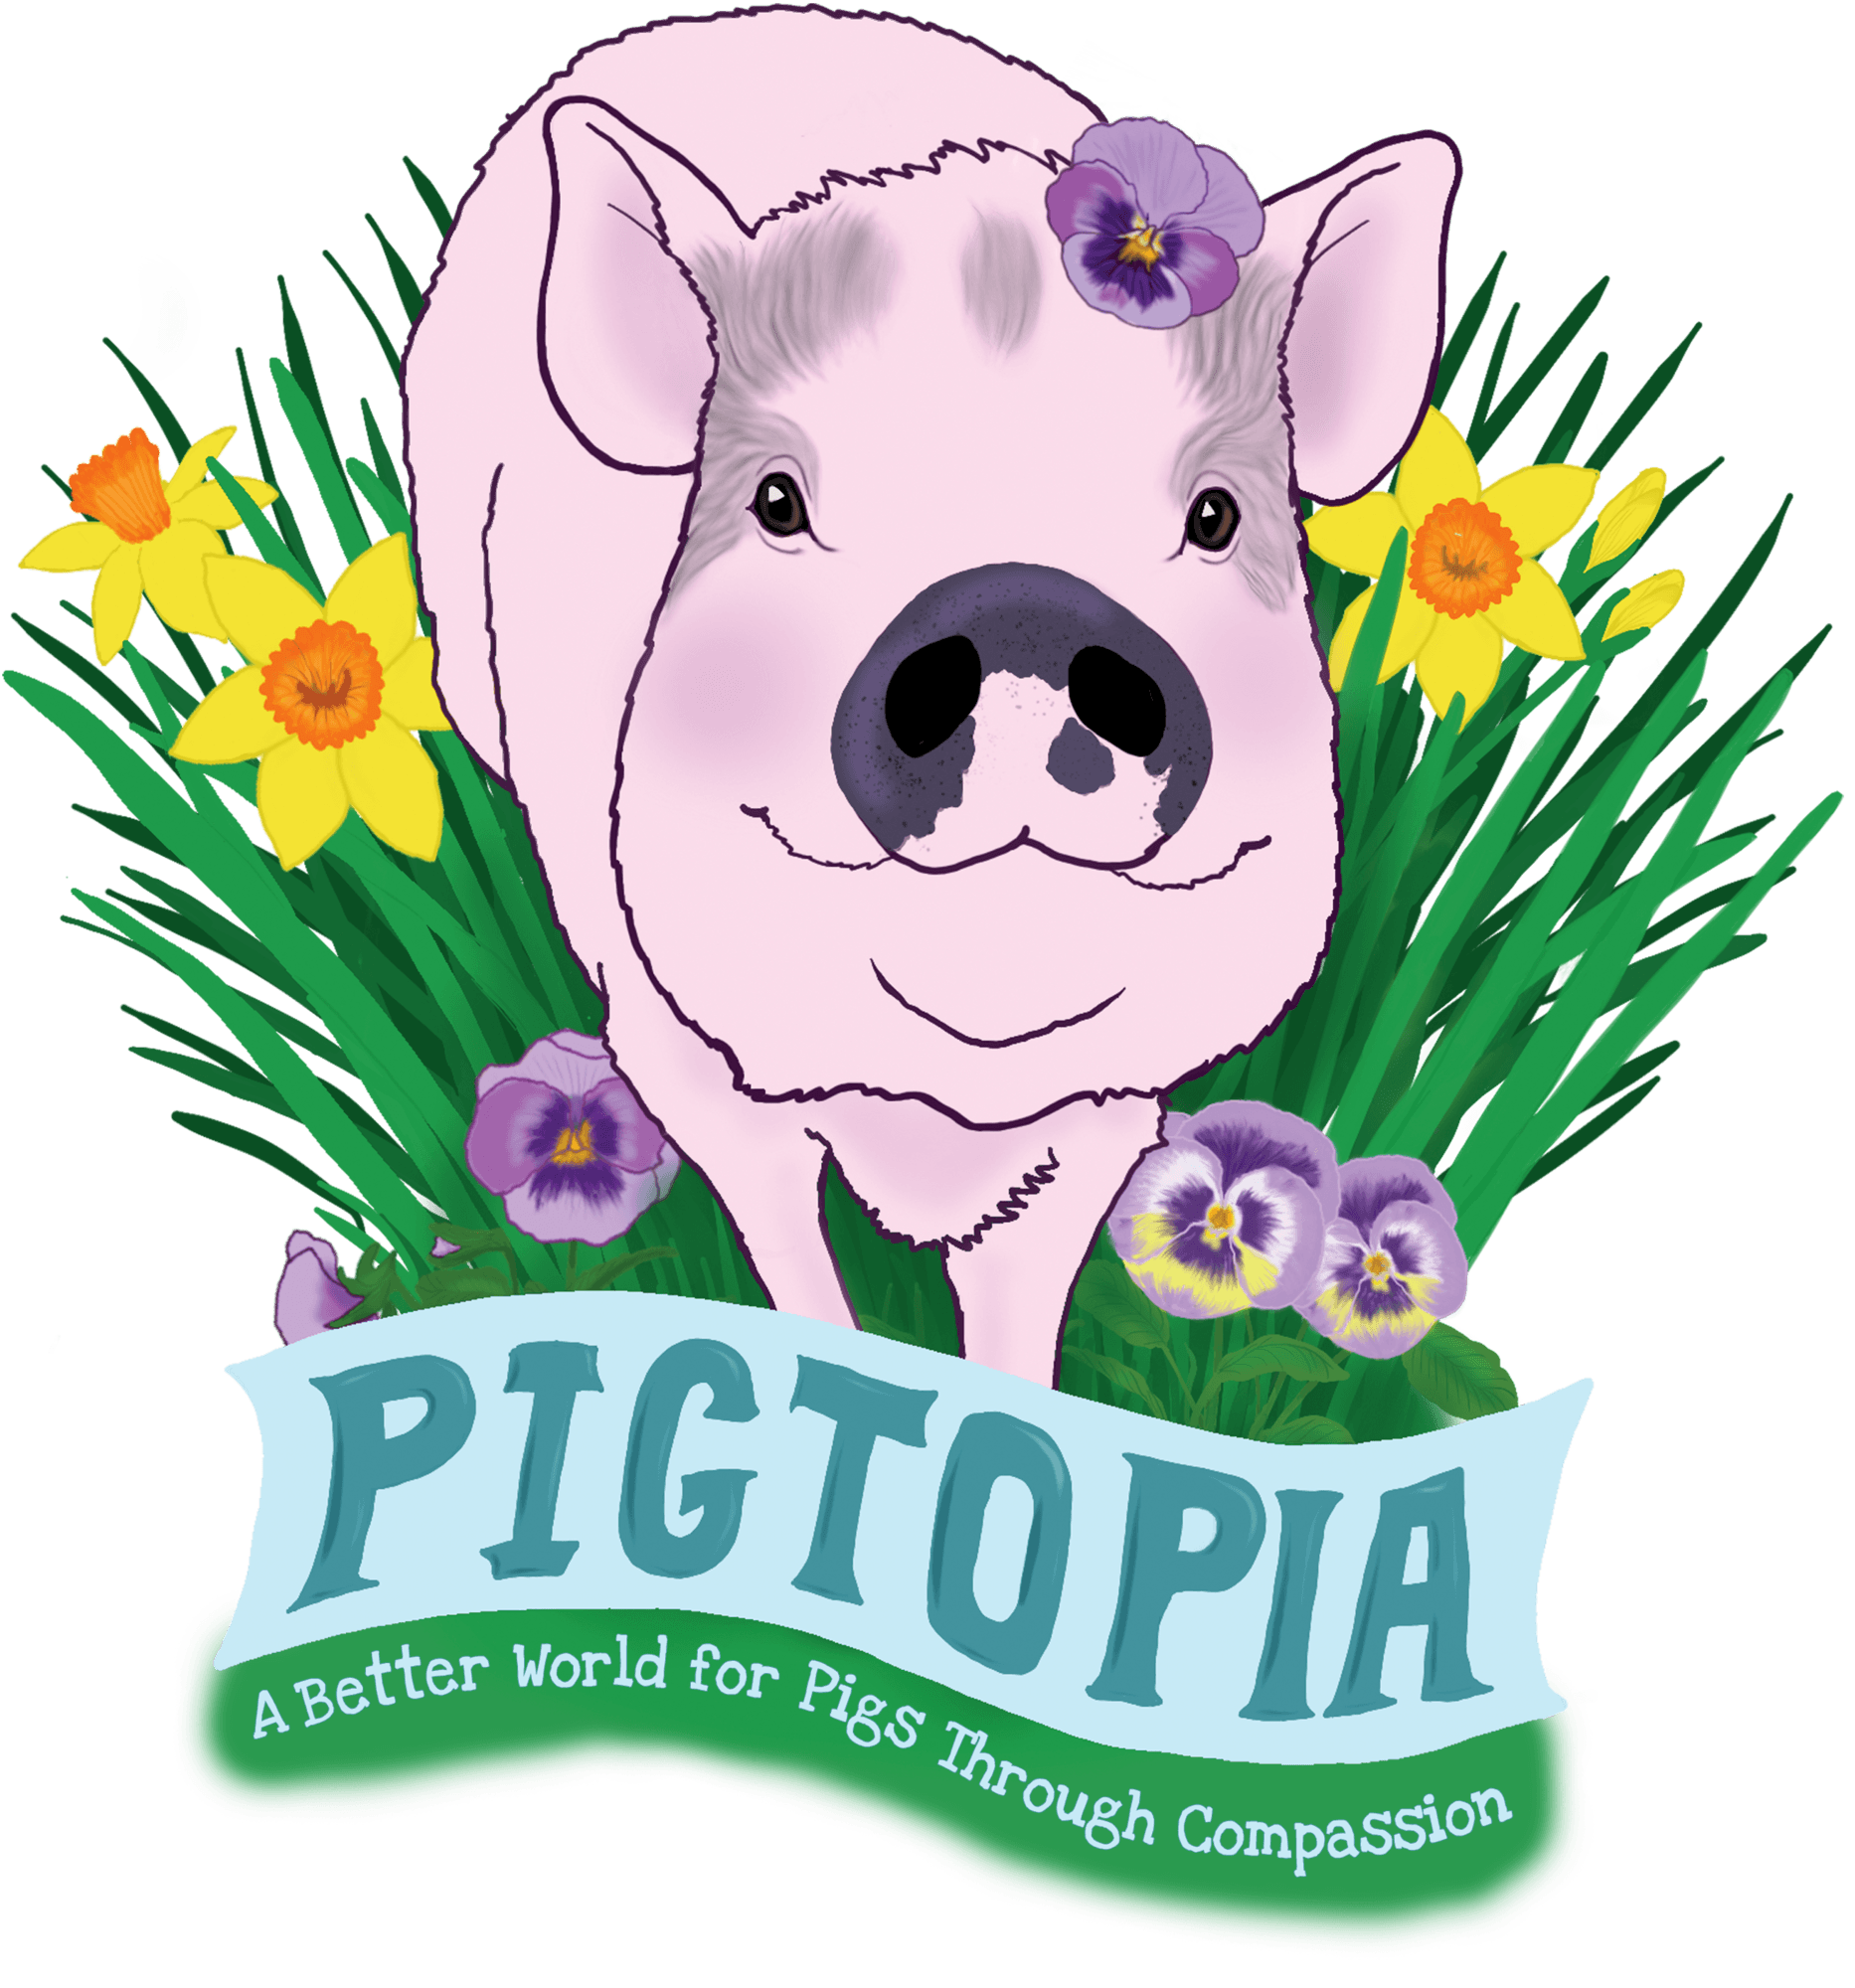 Pigtopia's illustrated logo featuring a pink pig with a spotted snout surrounded by daffodils. Text below the pig says "Pigtopia: A better world for pigs through compassion"